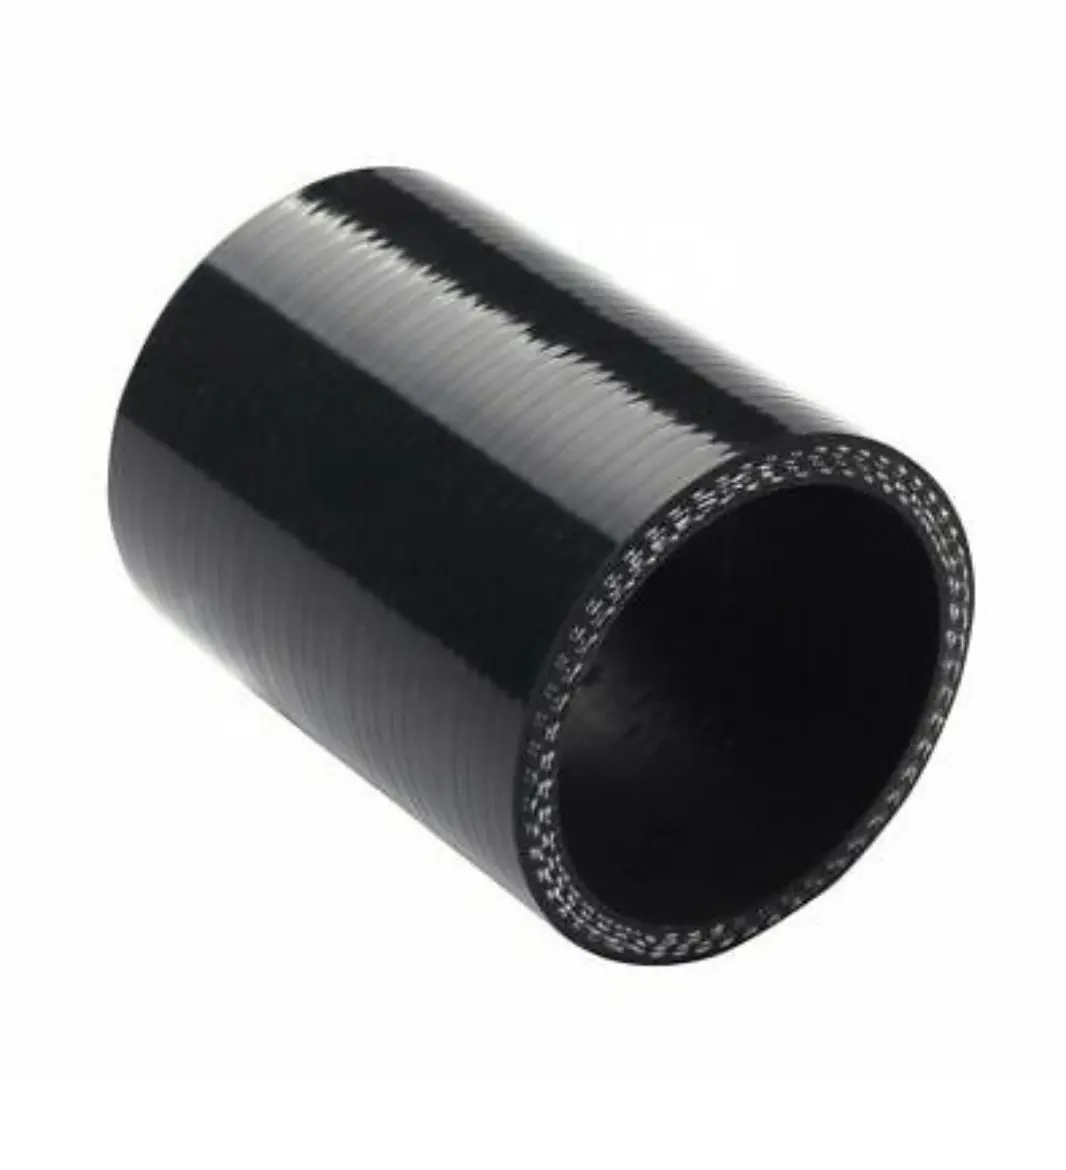 2" ID 51mm long 76mm Flexible High Temperature Radiator Silicone Hose Tube Coupler Pipe Black Blue Red